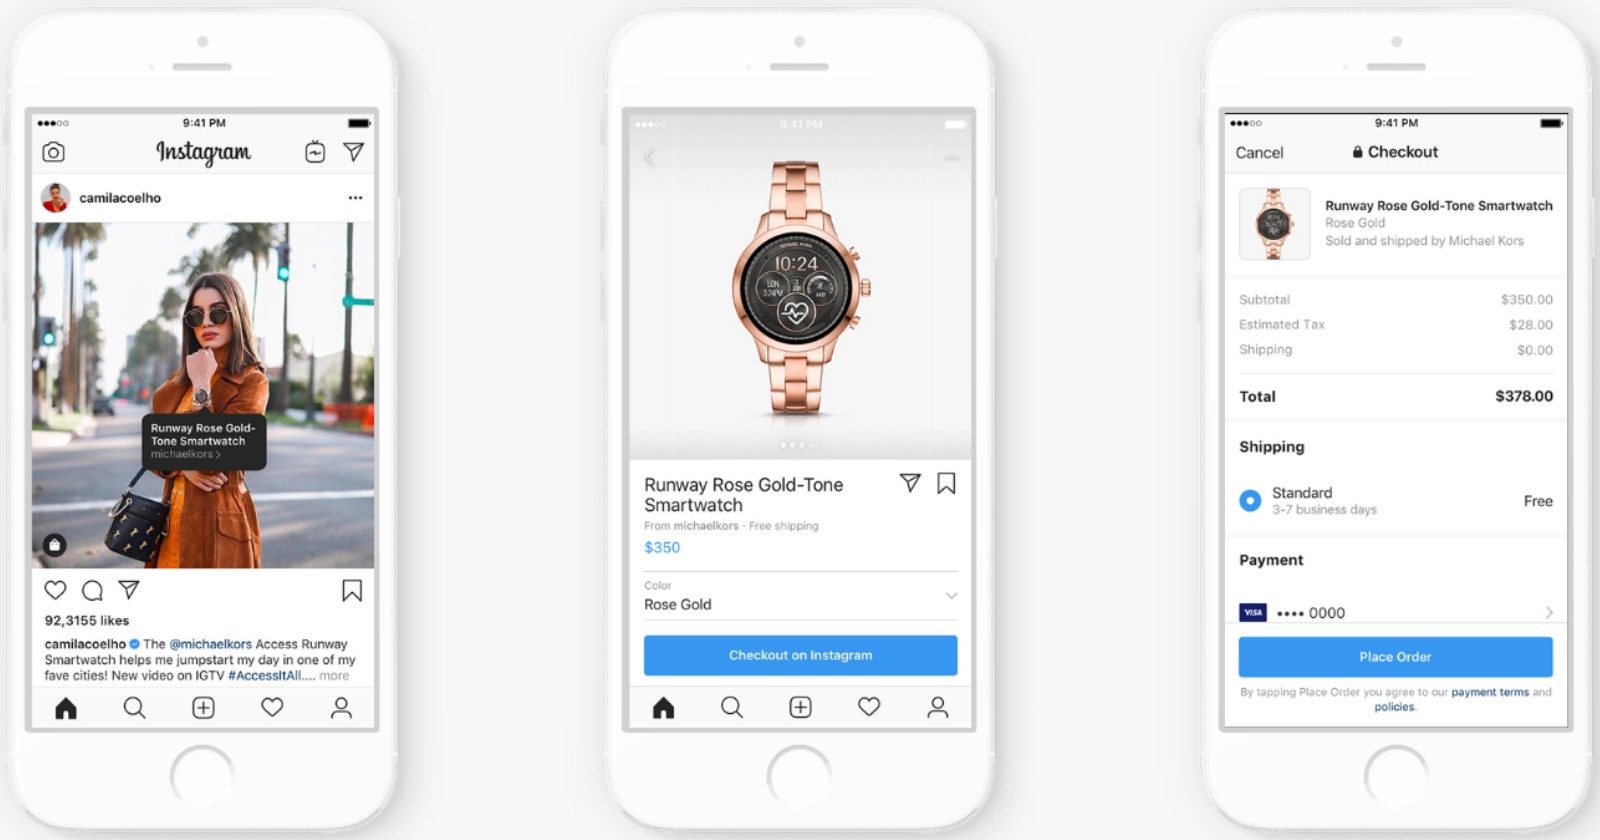 How to Roll out New Products on Instagram